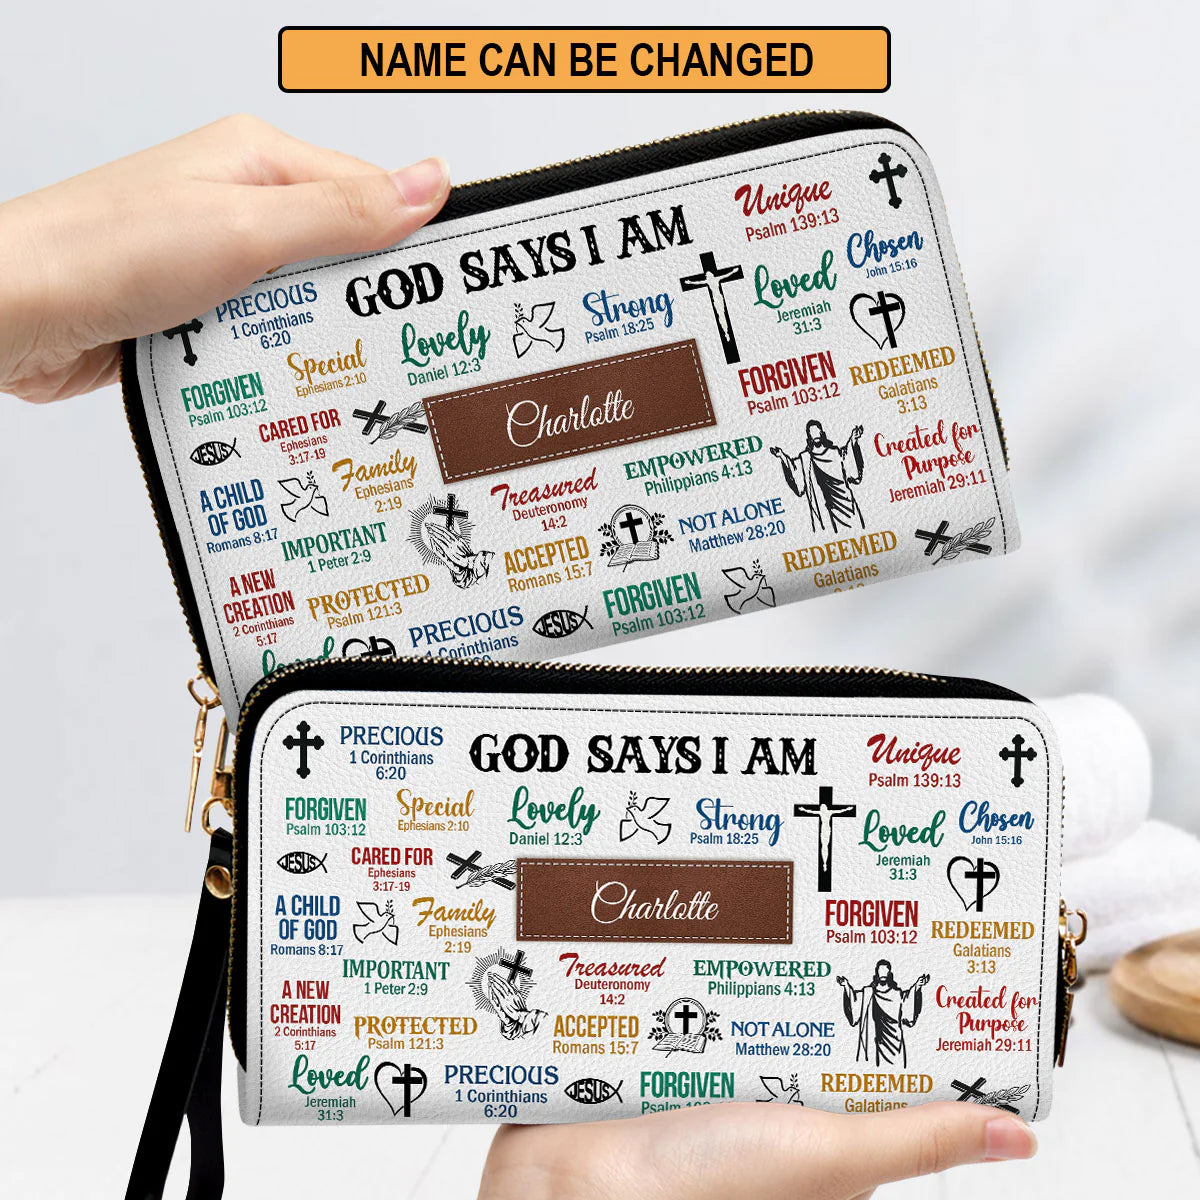 Christianart Handbag, Personalized Hand Bag, What God Says About You, Personalized Gifts, Gifts for Women. - Christian Art Bag